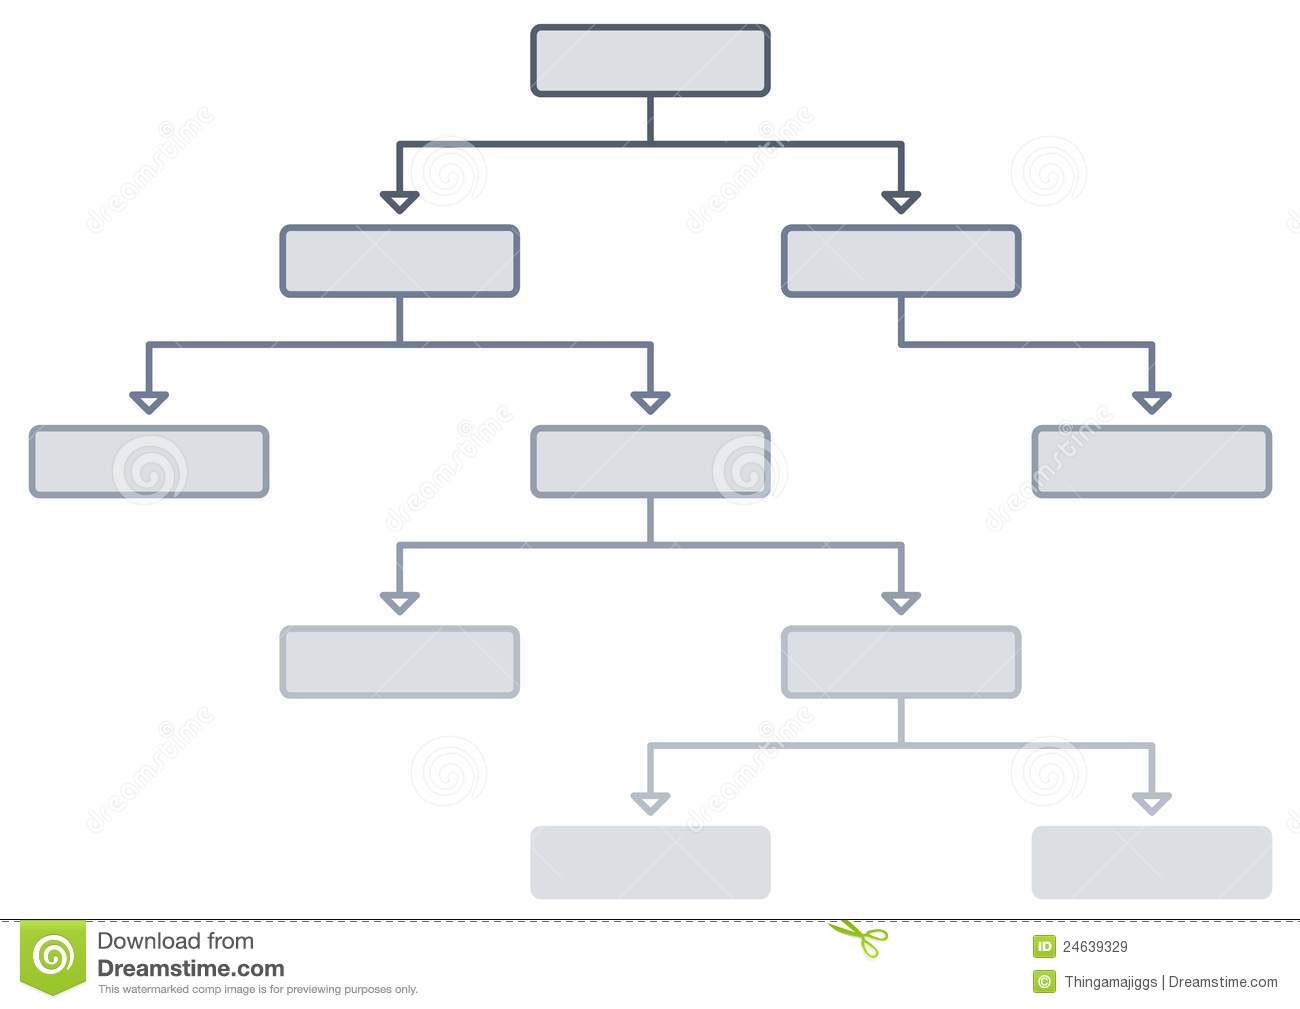 Decision Tree Royalty Free Stock Images   Image  24639329